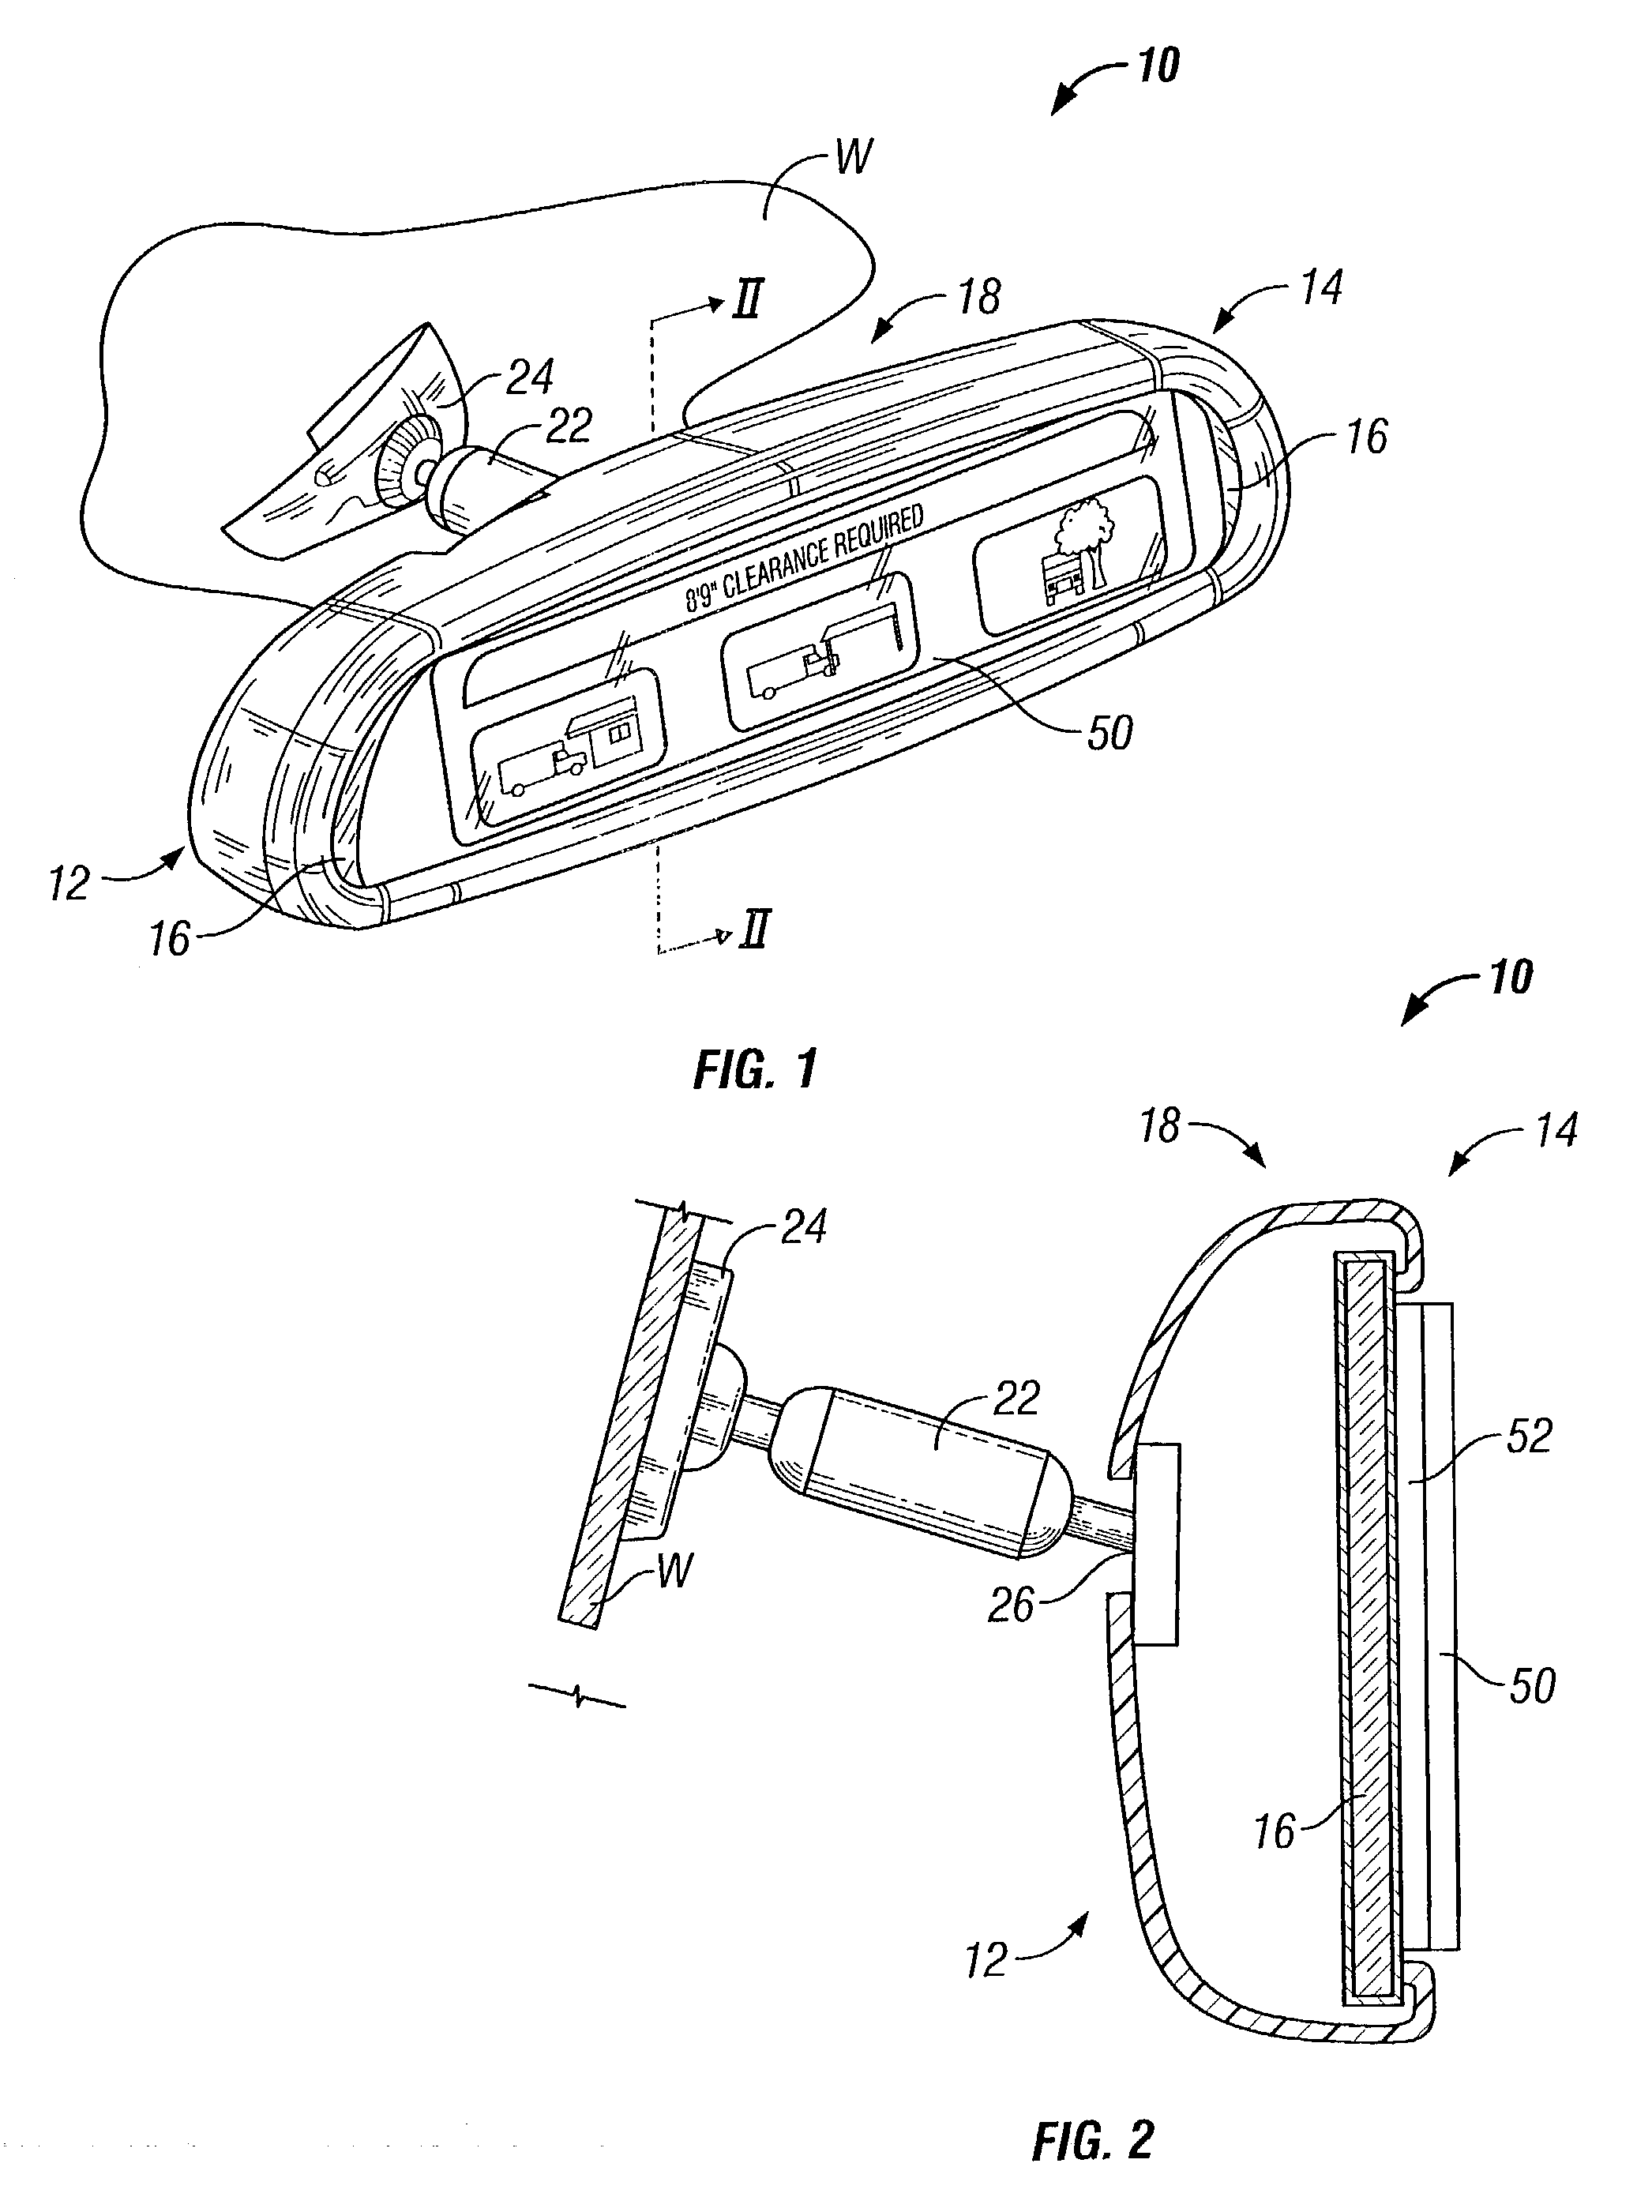 Method and apparatus for converting a rearview mirror into a dedicated information display